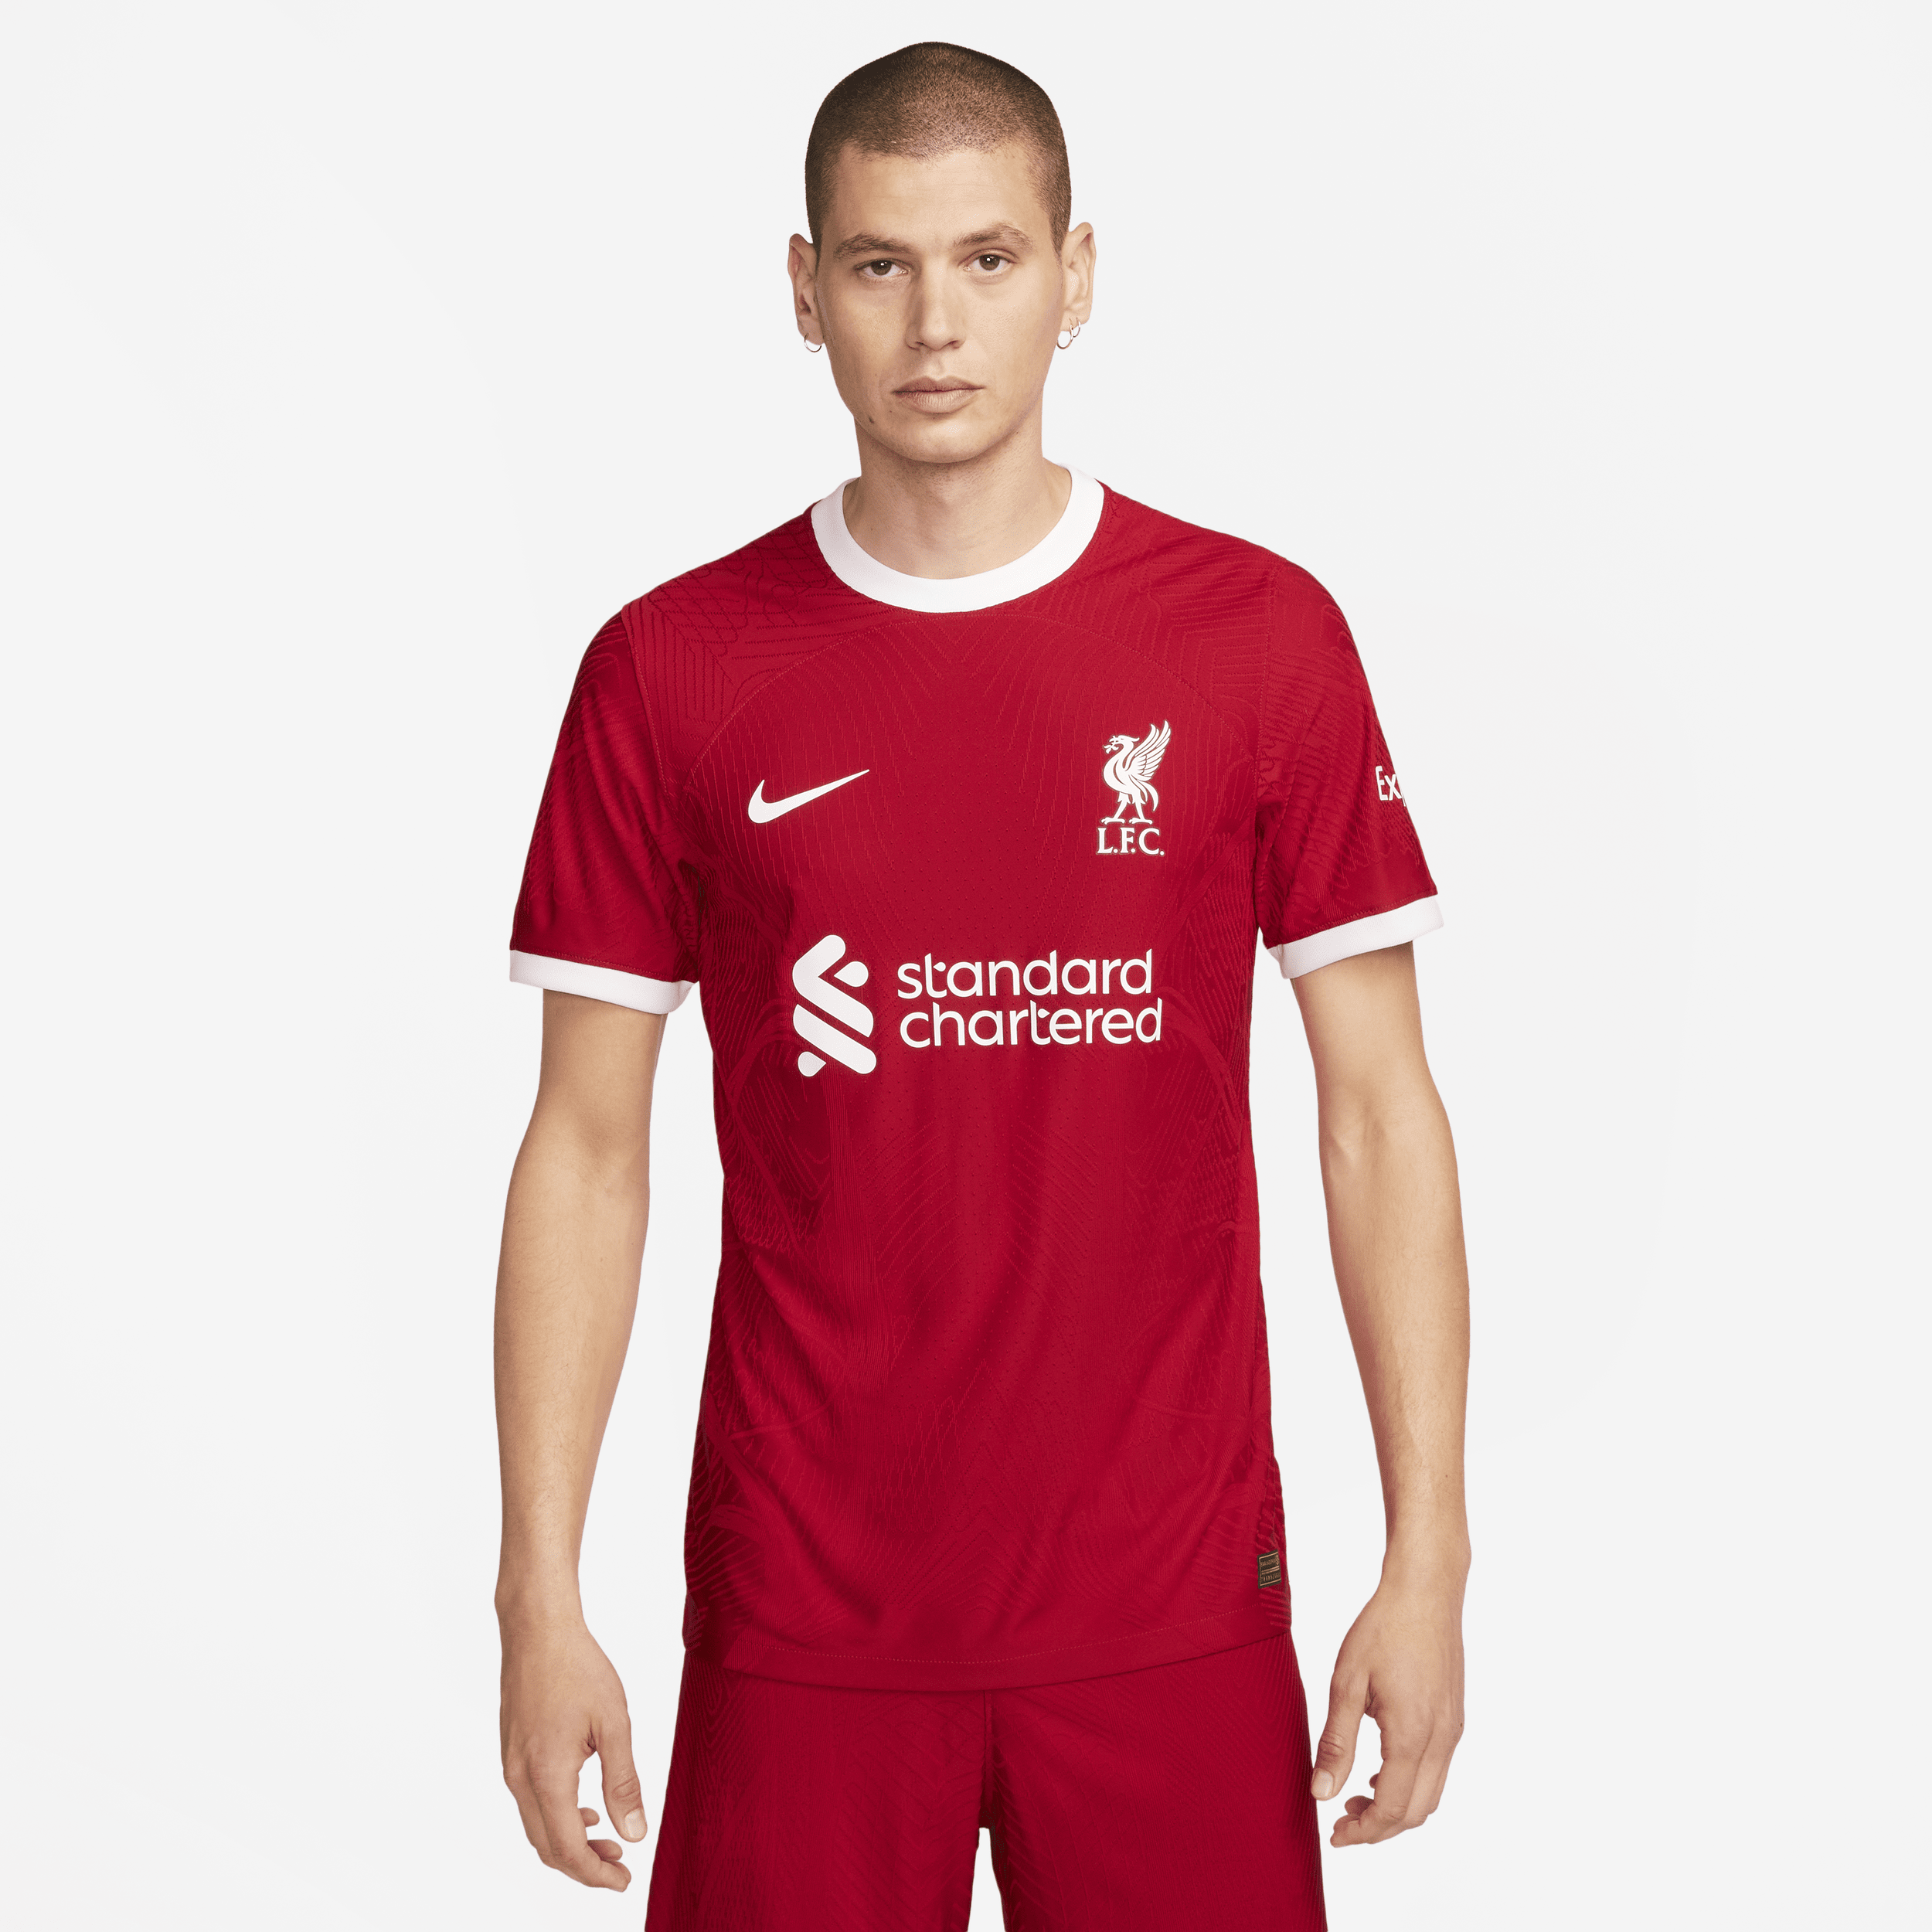 Liverpool FC 2023/24 Match Thuis Nike Dri-FIT ADV voetbalshirt voor heren - Rood